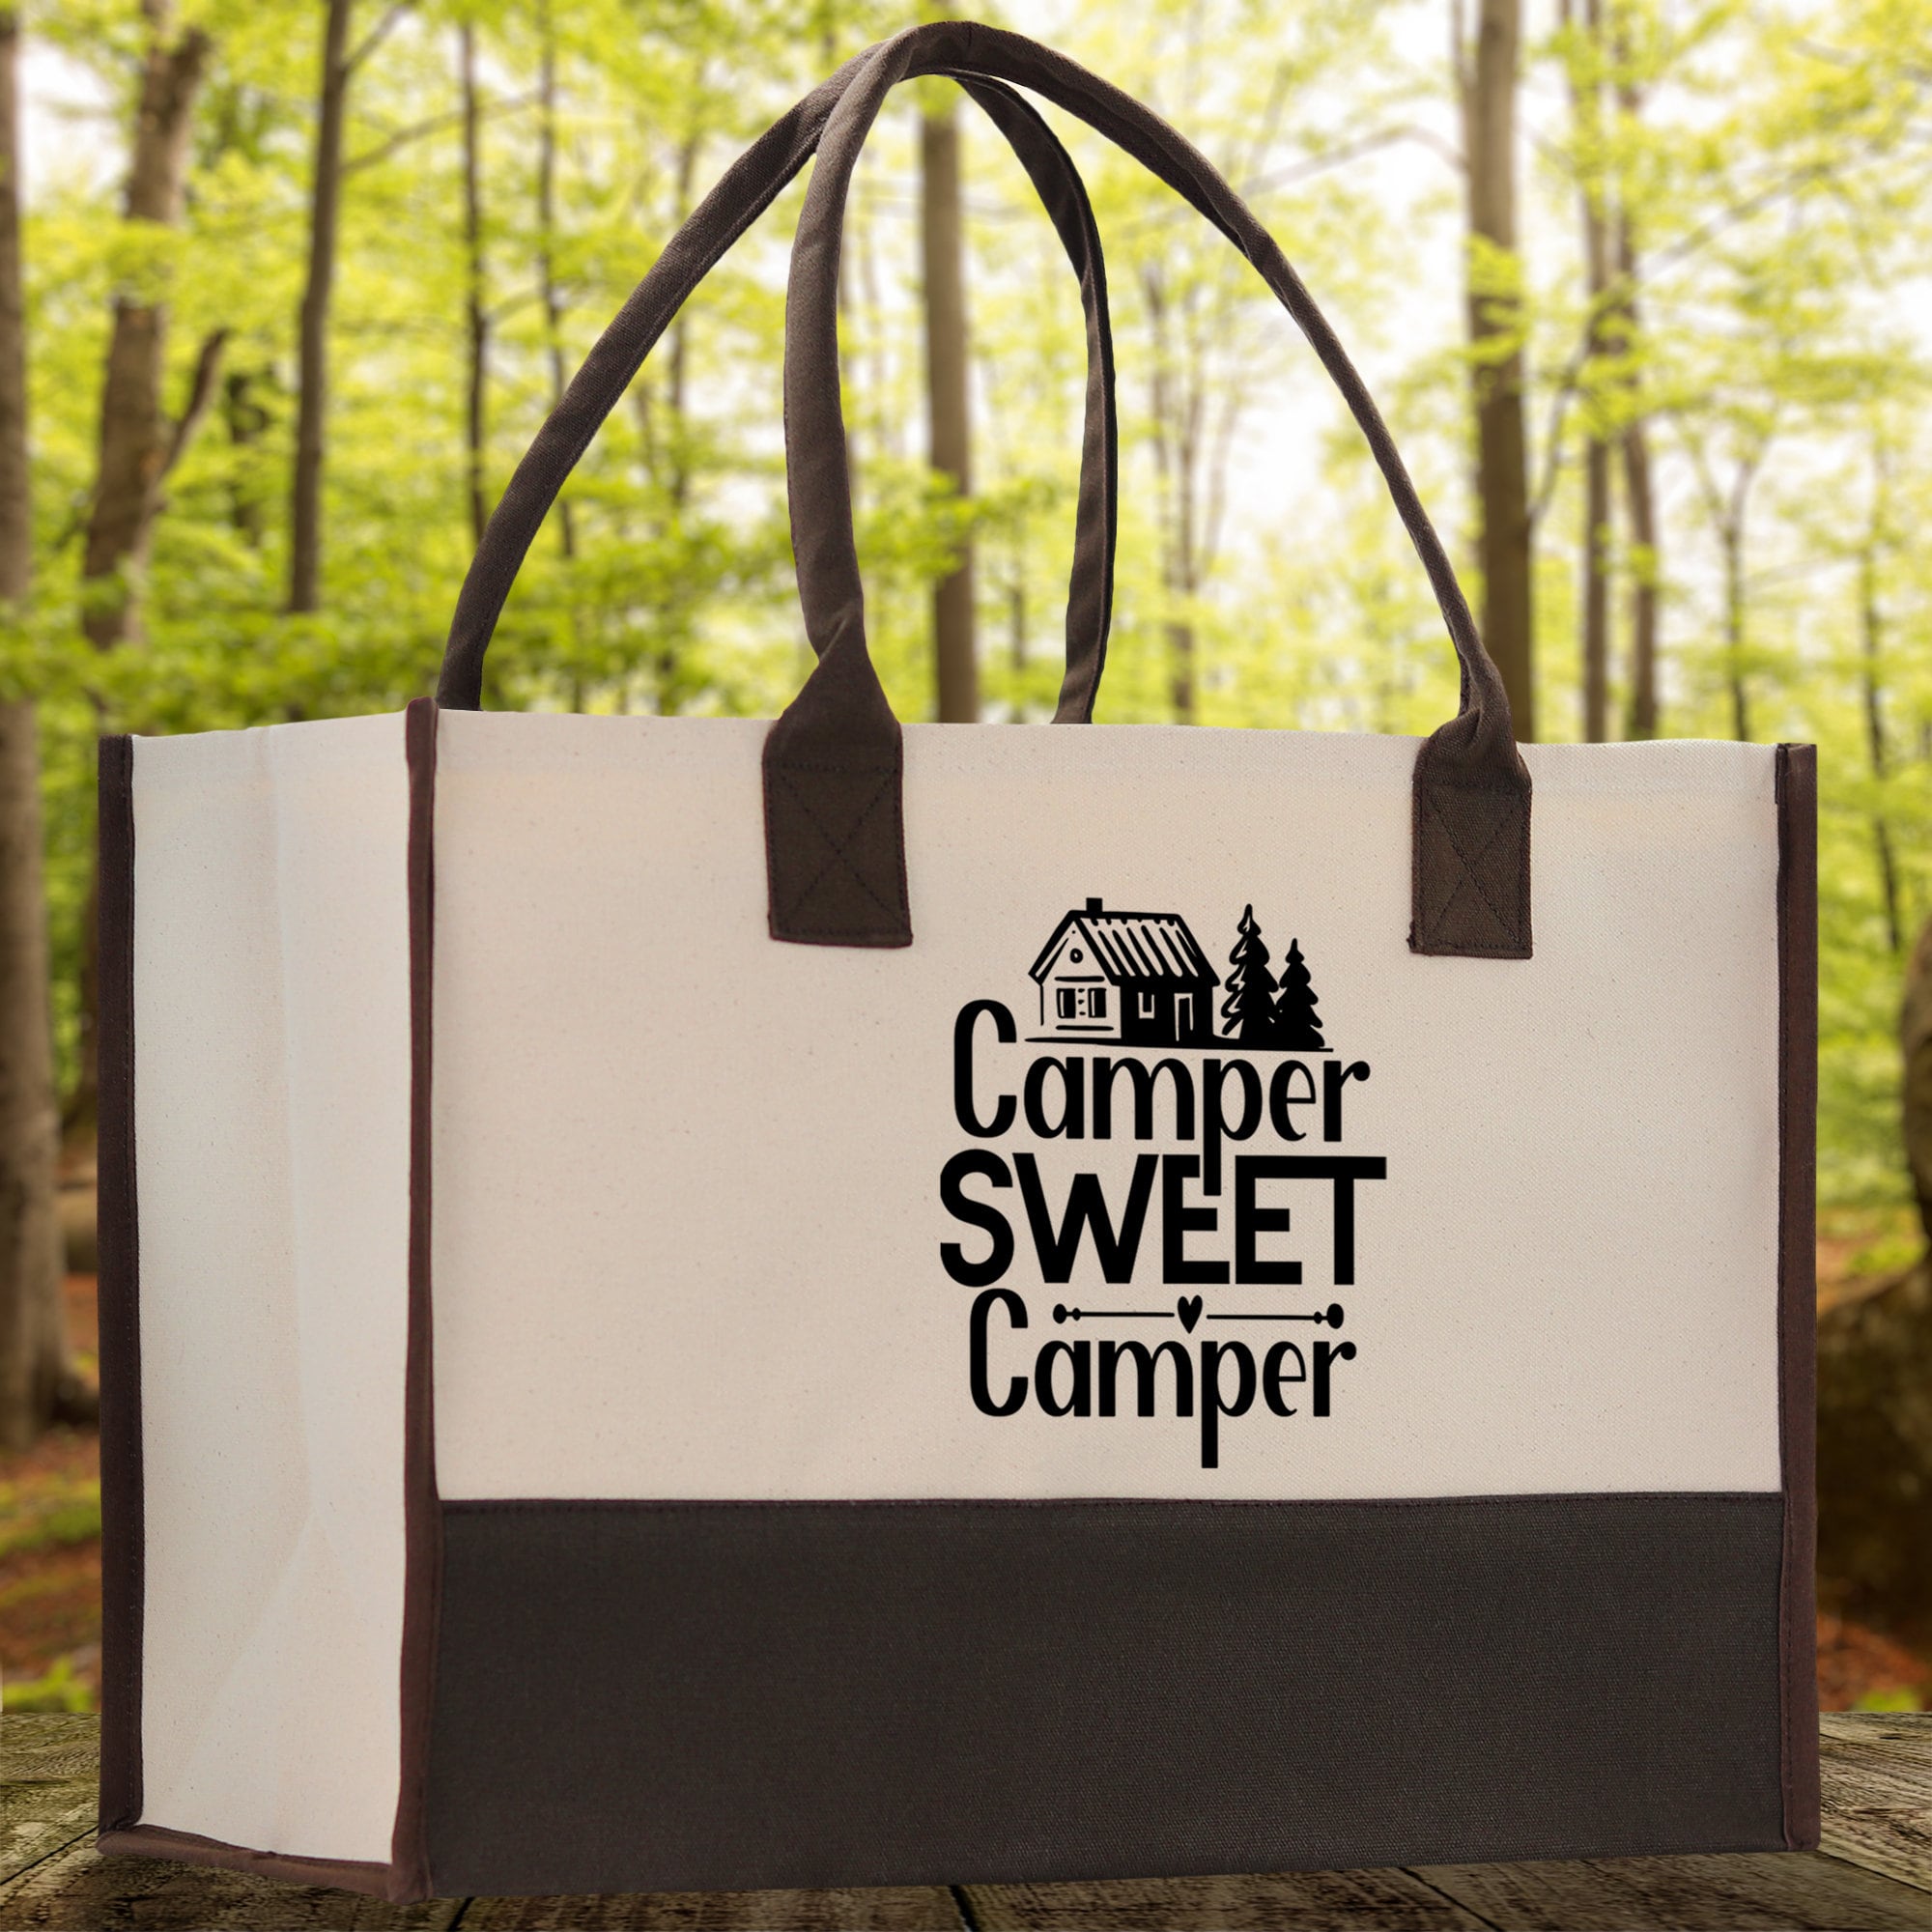 Camper Sweet Camper Cotton Canvas Chic Tote Bag Camping Tote Camping Lover Gift Tote Bag Outdoor Tote Weekender Tote Camper Tote